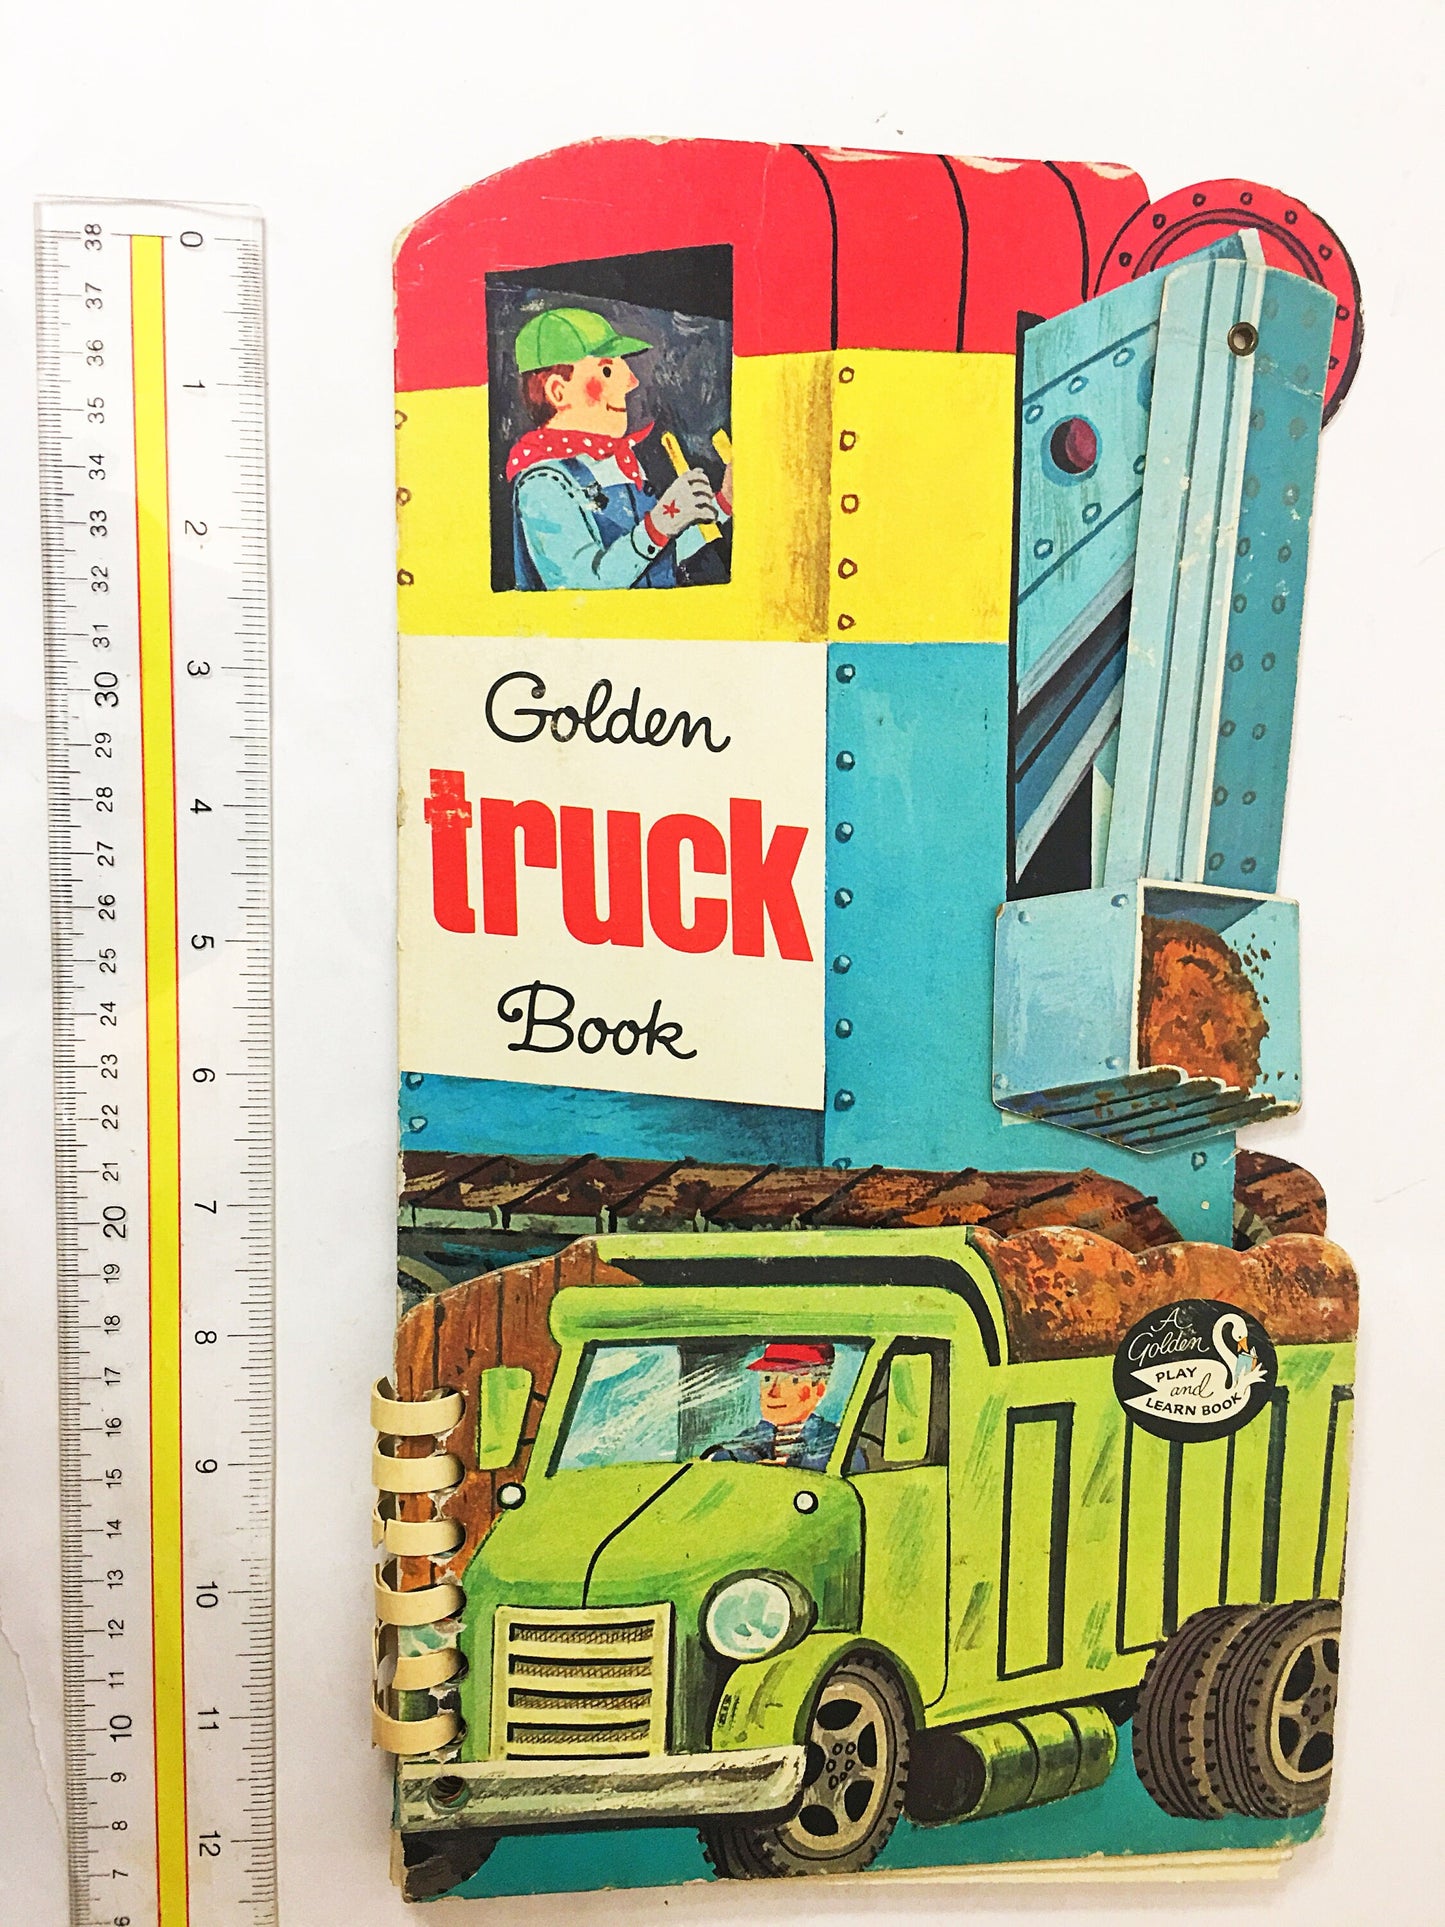 Golden Truck Book. Susan Witty and Bill Dugan. Play and Learn Golden Book circa 1969. Unmarked pages. Little Golden Book. Vintage